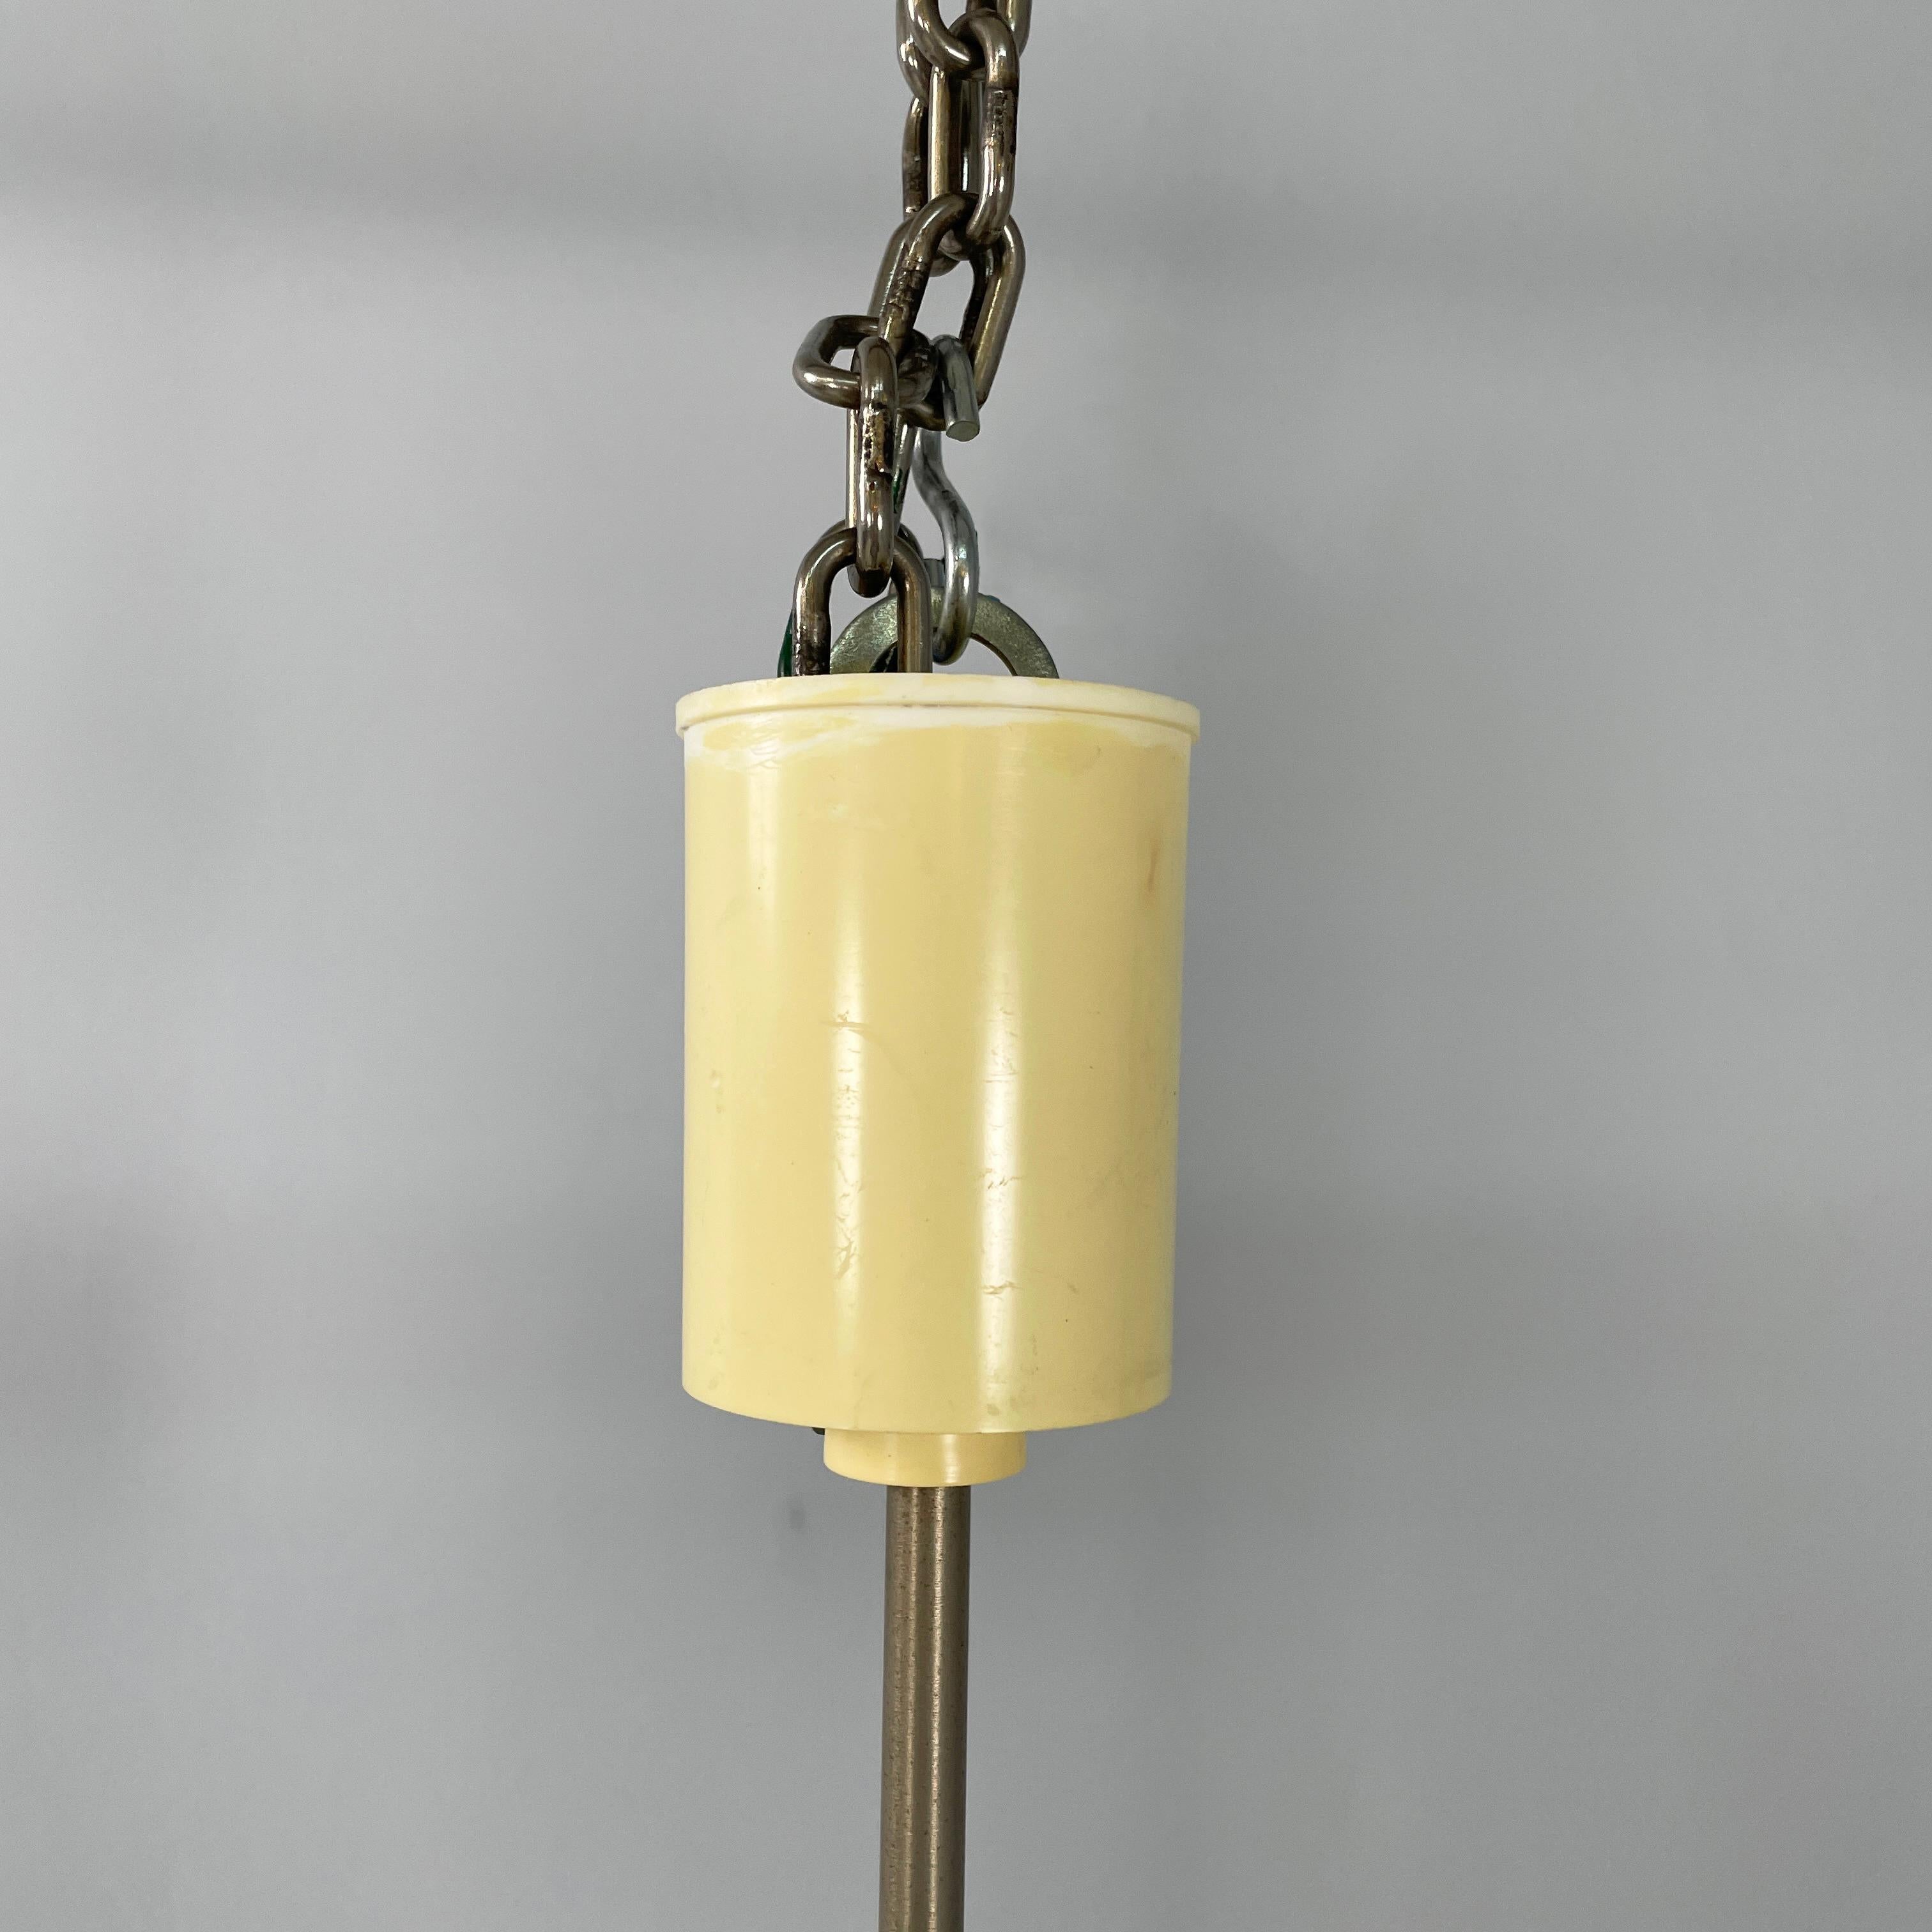 German Bauhaus Chandelier in opaline glass, white plastic and metal, 1920s For Sale 9